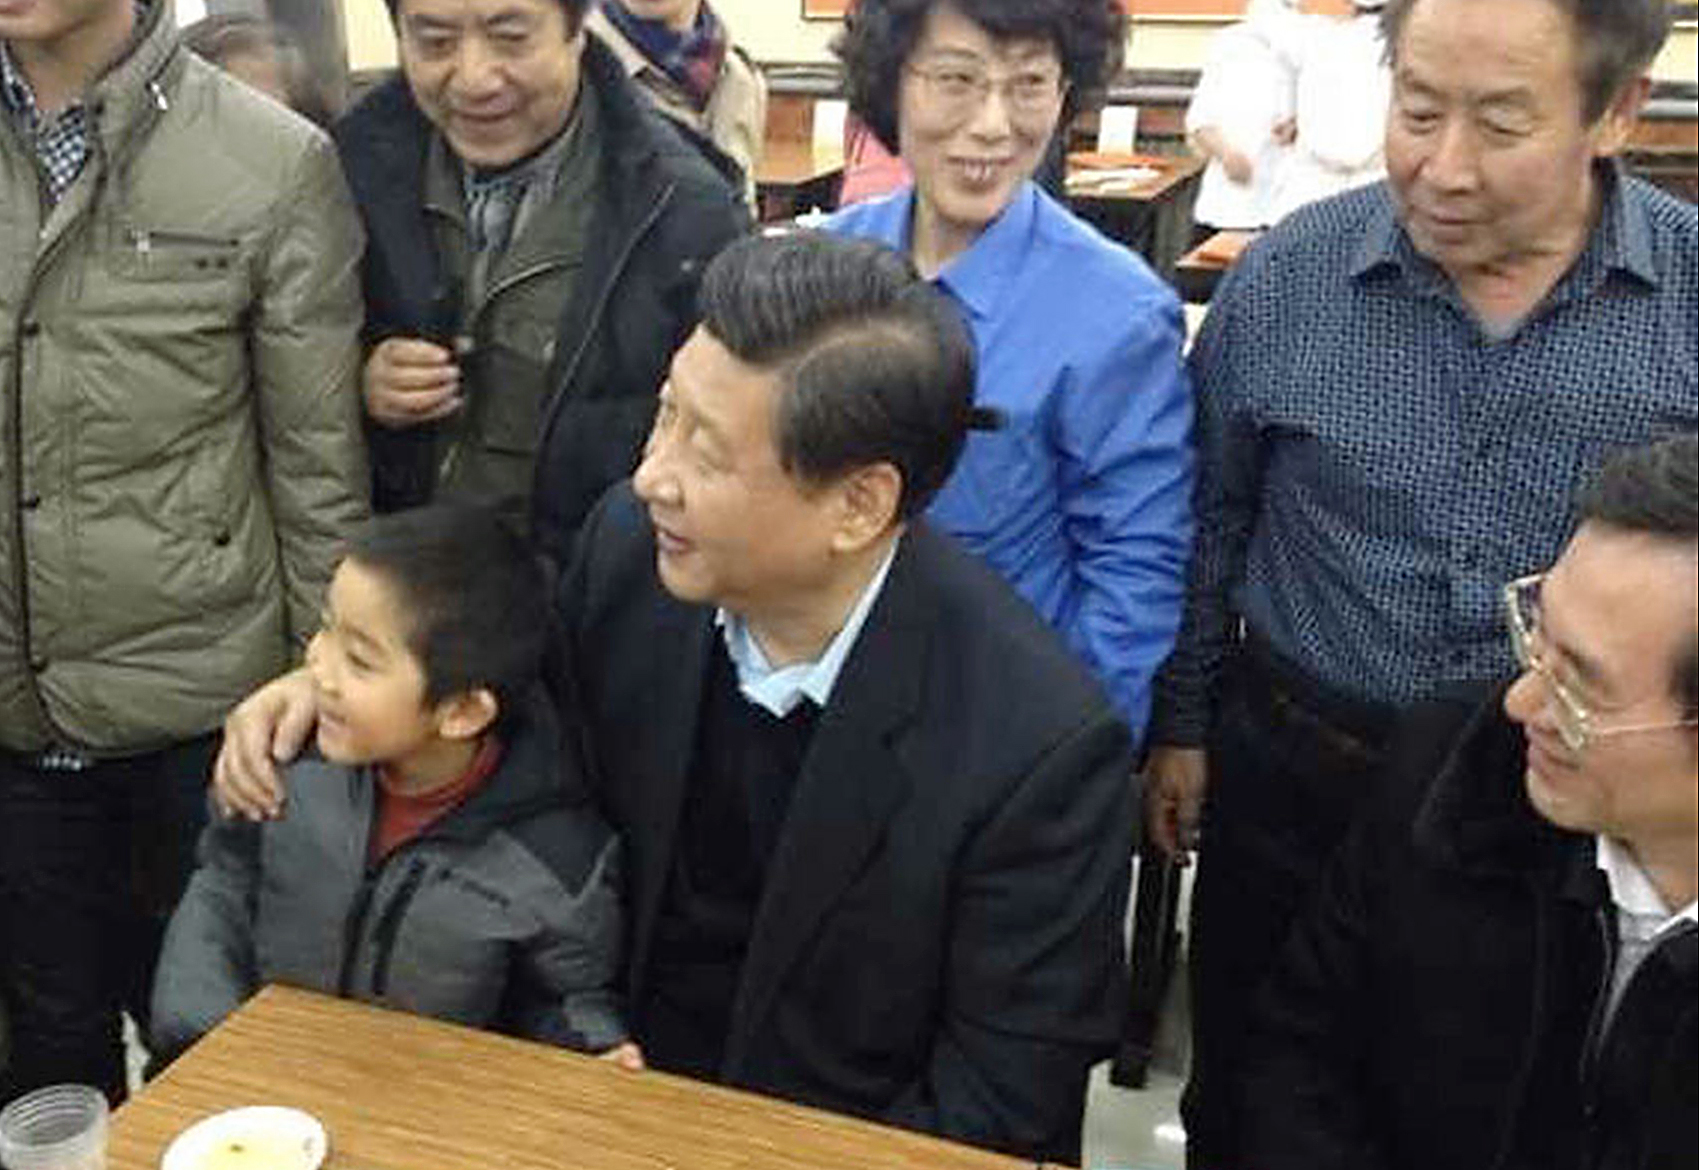 Chinese president Xi Jinping seen in a Beijing steamed bun restaurant taking a picture with a young boy on December 28, 2013. Photo: SCMP Pictures